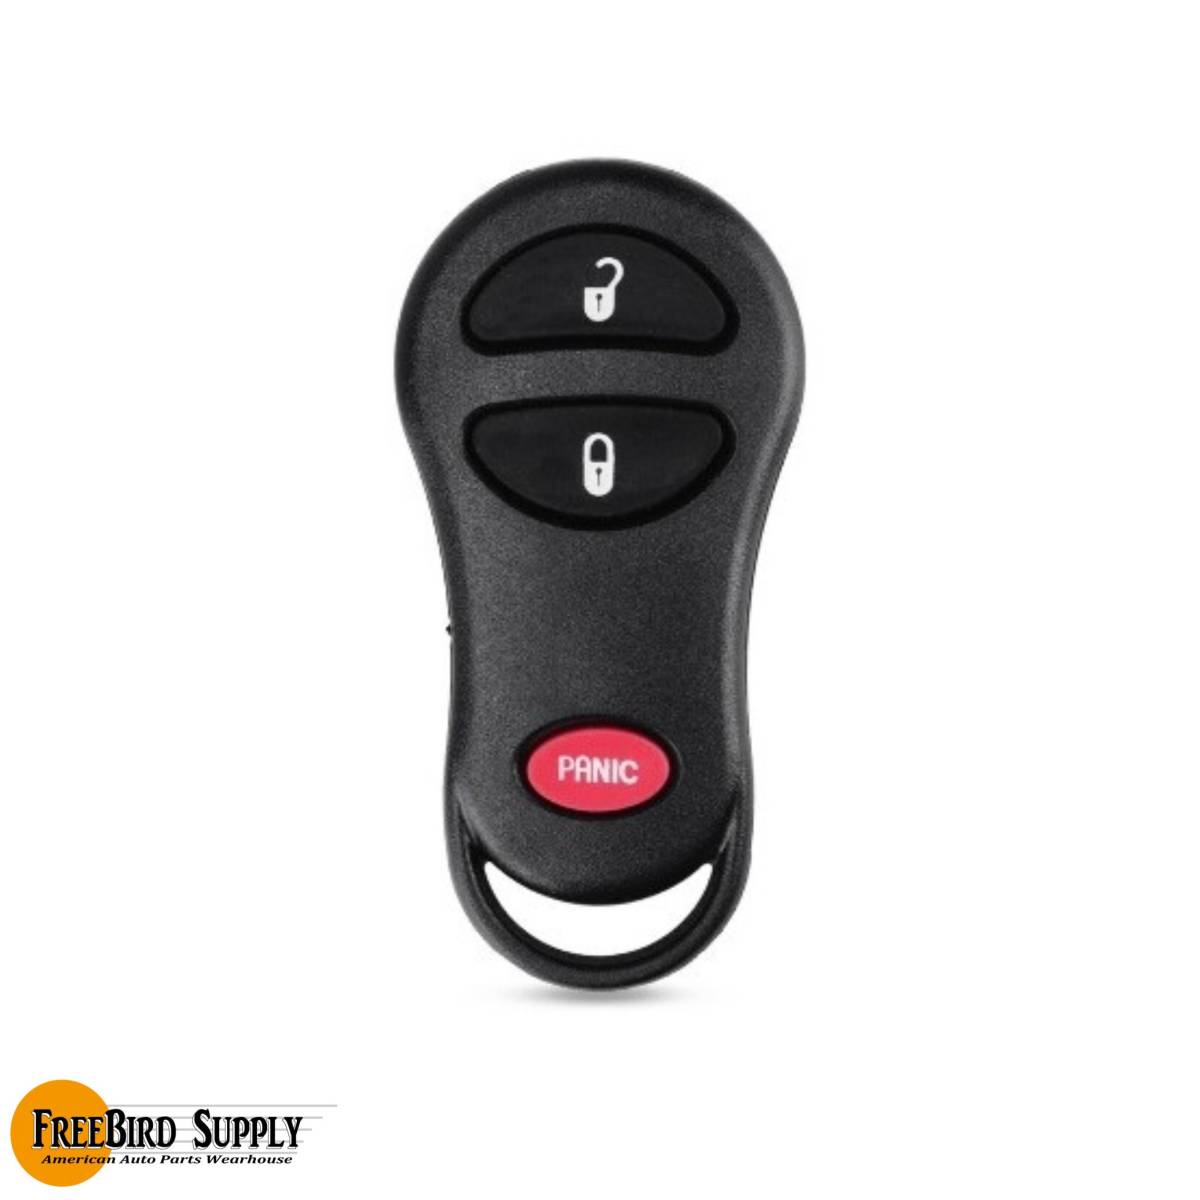 CHP005#2 3 button keyless remote control chip attached Chrysler 2001~05 PT Cruiser / 2000~03 Voyager / 1999~03 Town & Country 